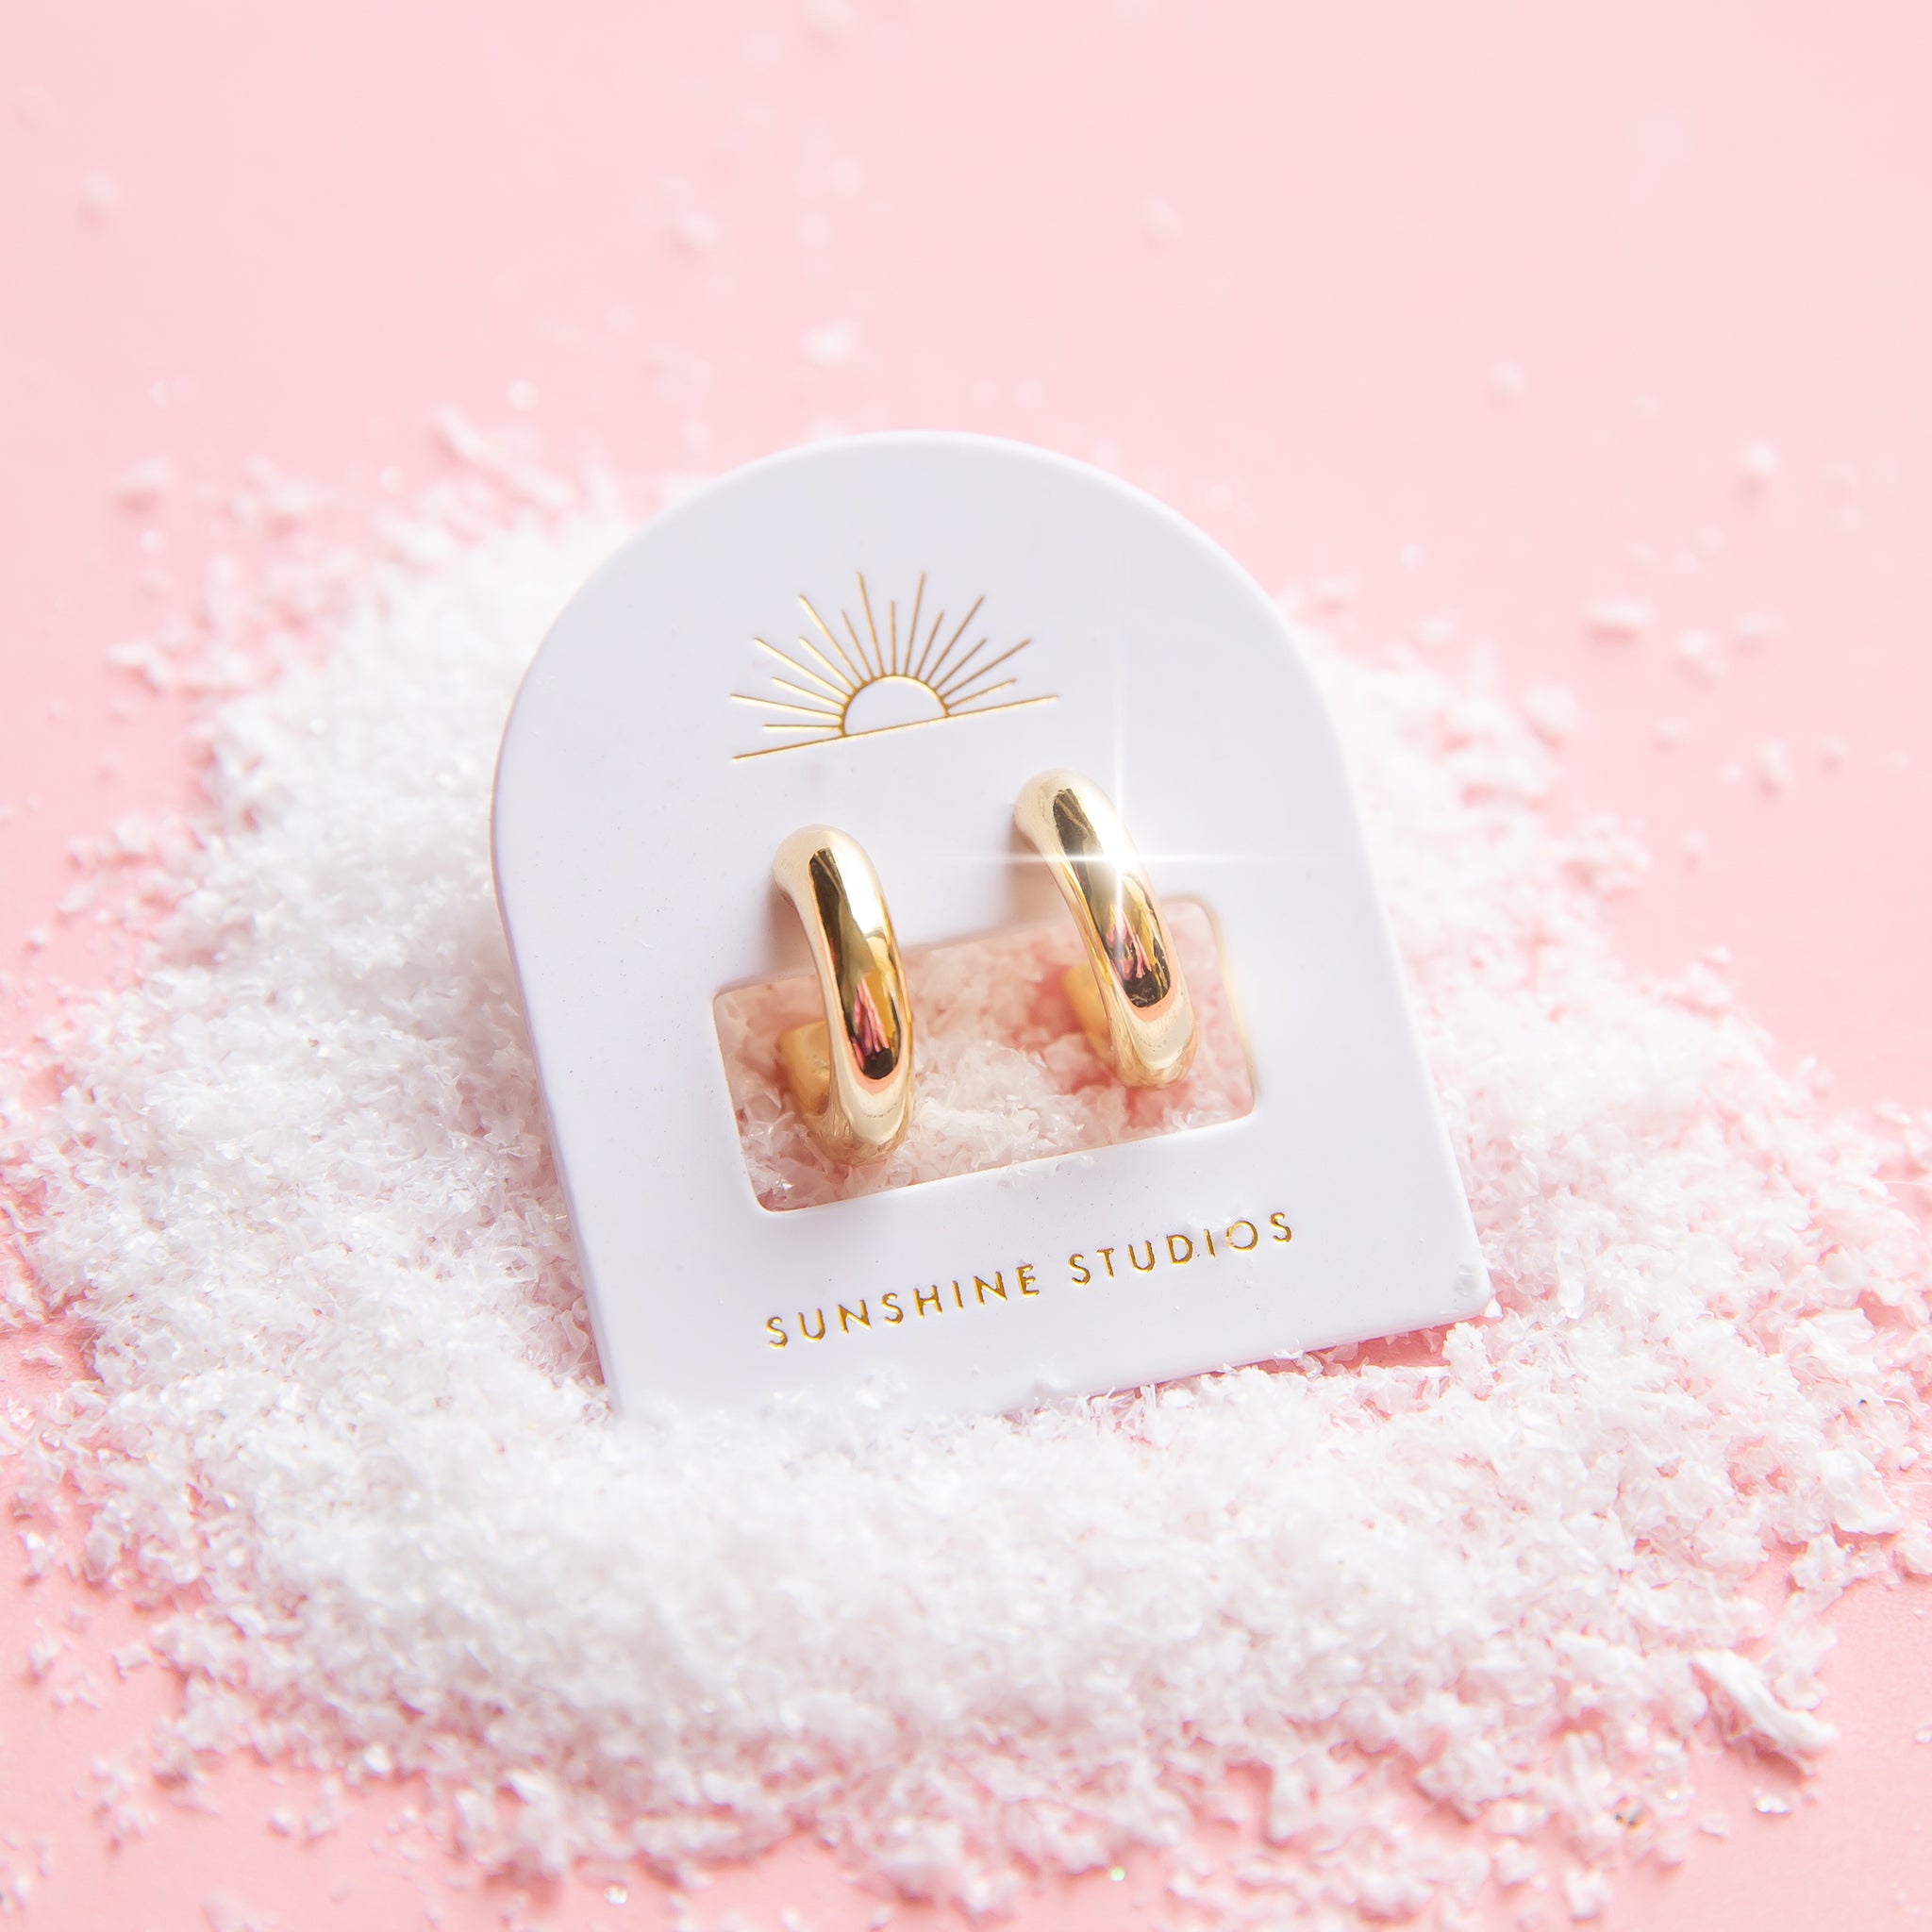 On a snowy pink background is a pair of chunky gold hoop earrings on their arched packaging with a sun ray logo at the top and gold text at the bottom that reads, "Sunshine Studios".